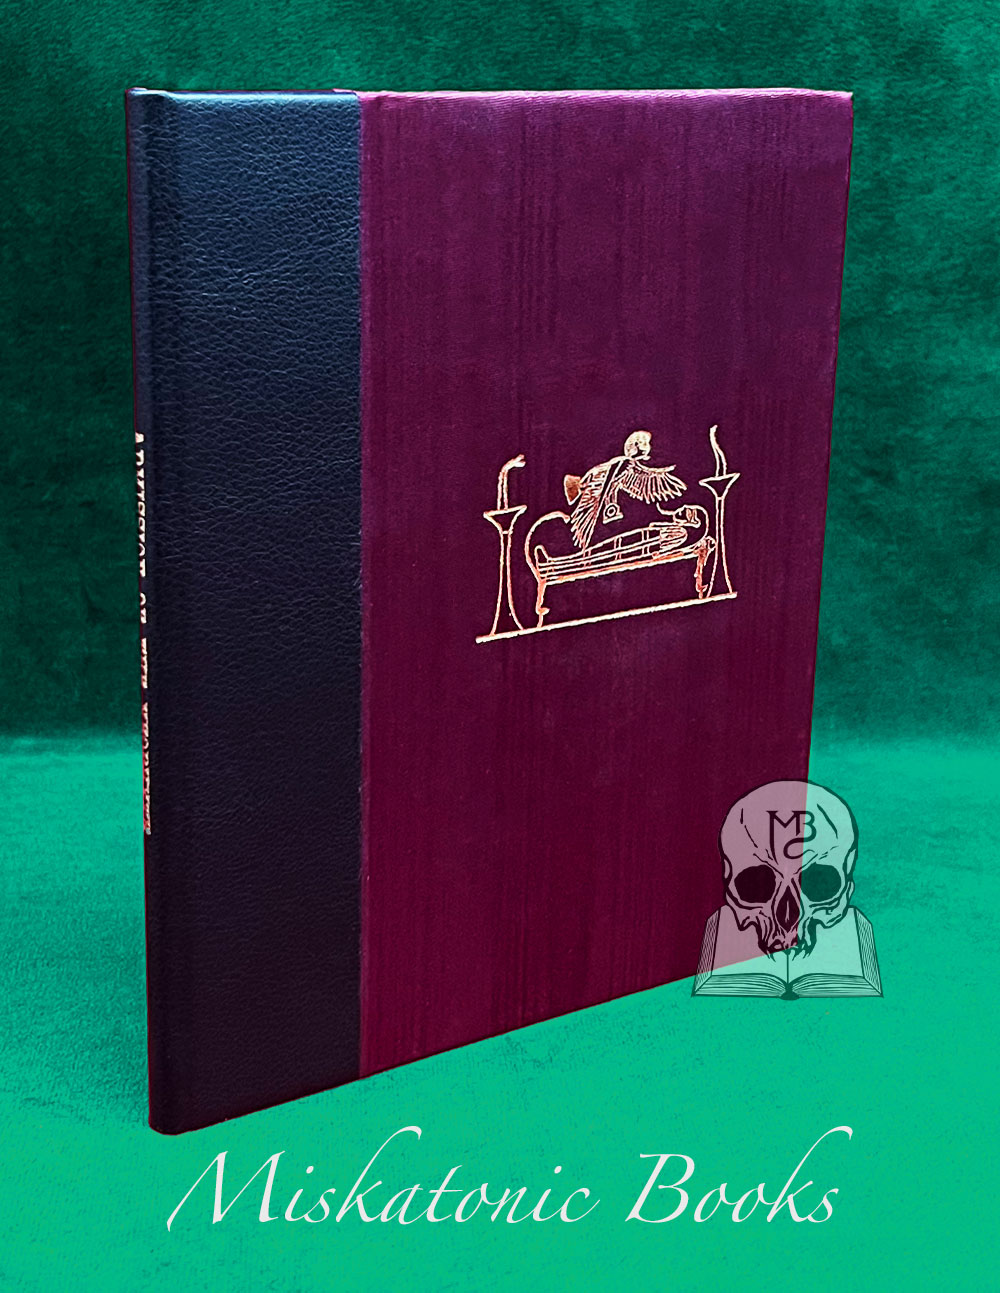 ADMISSION OF THE NEOPHYTE: The Enterer of the Threshold, Ritual Z Part 3 - Limited Edition Hardcover Quarter Bound in Leather and Silk